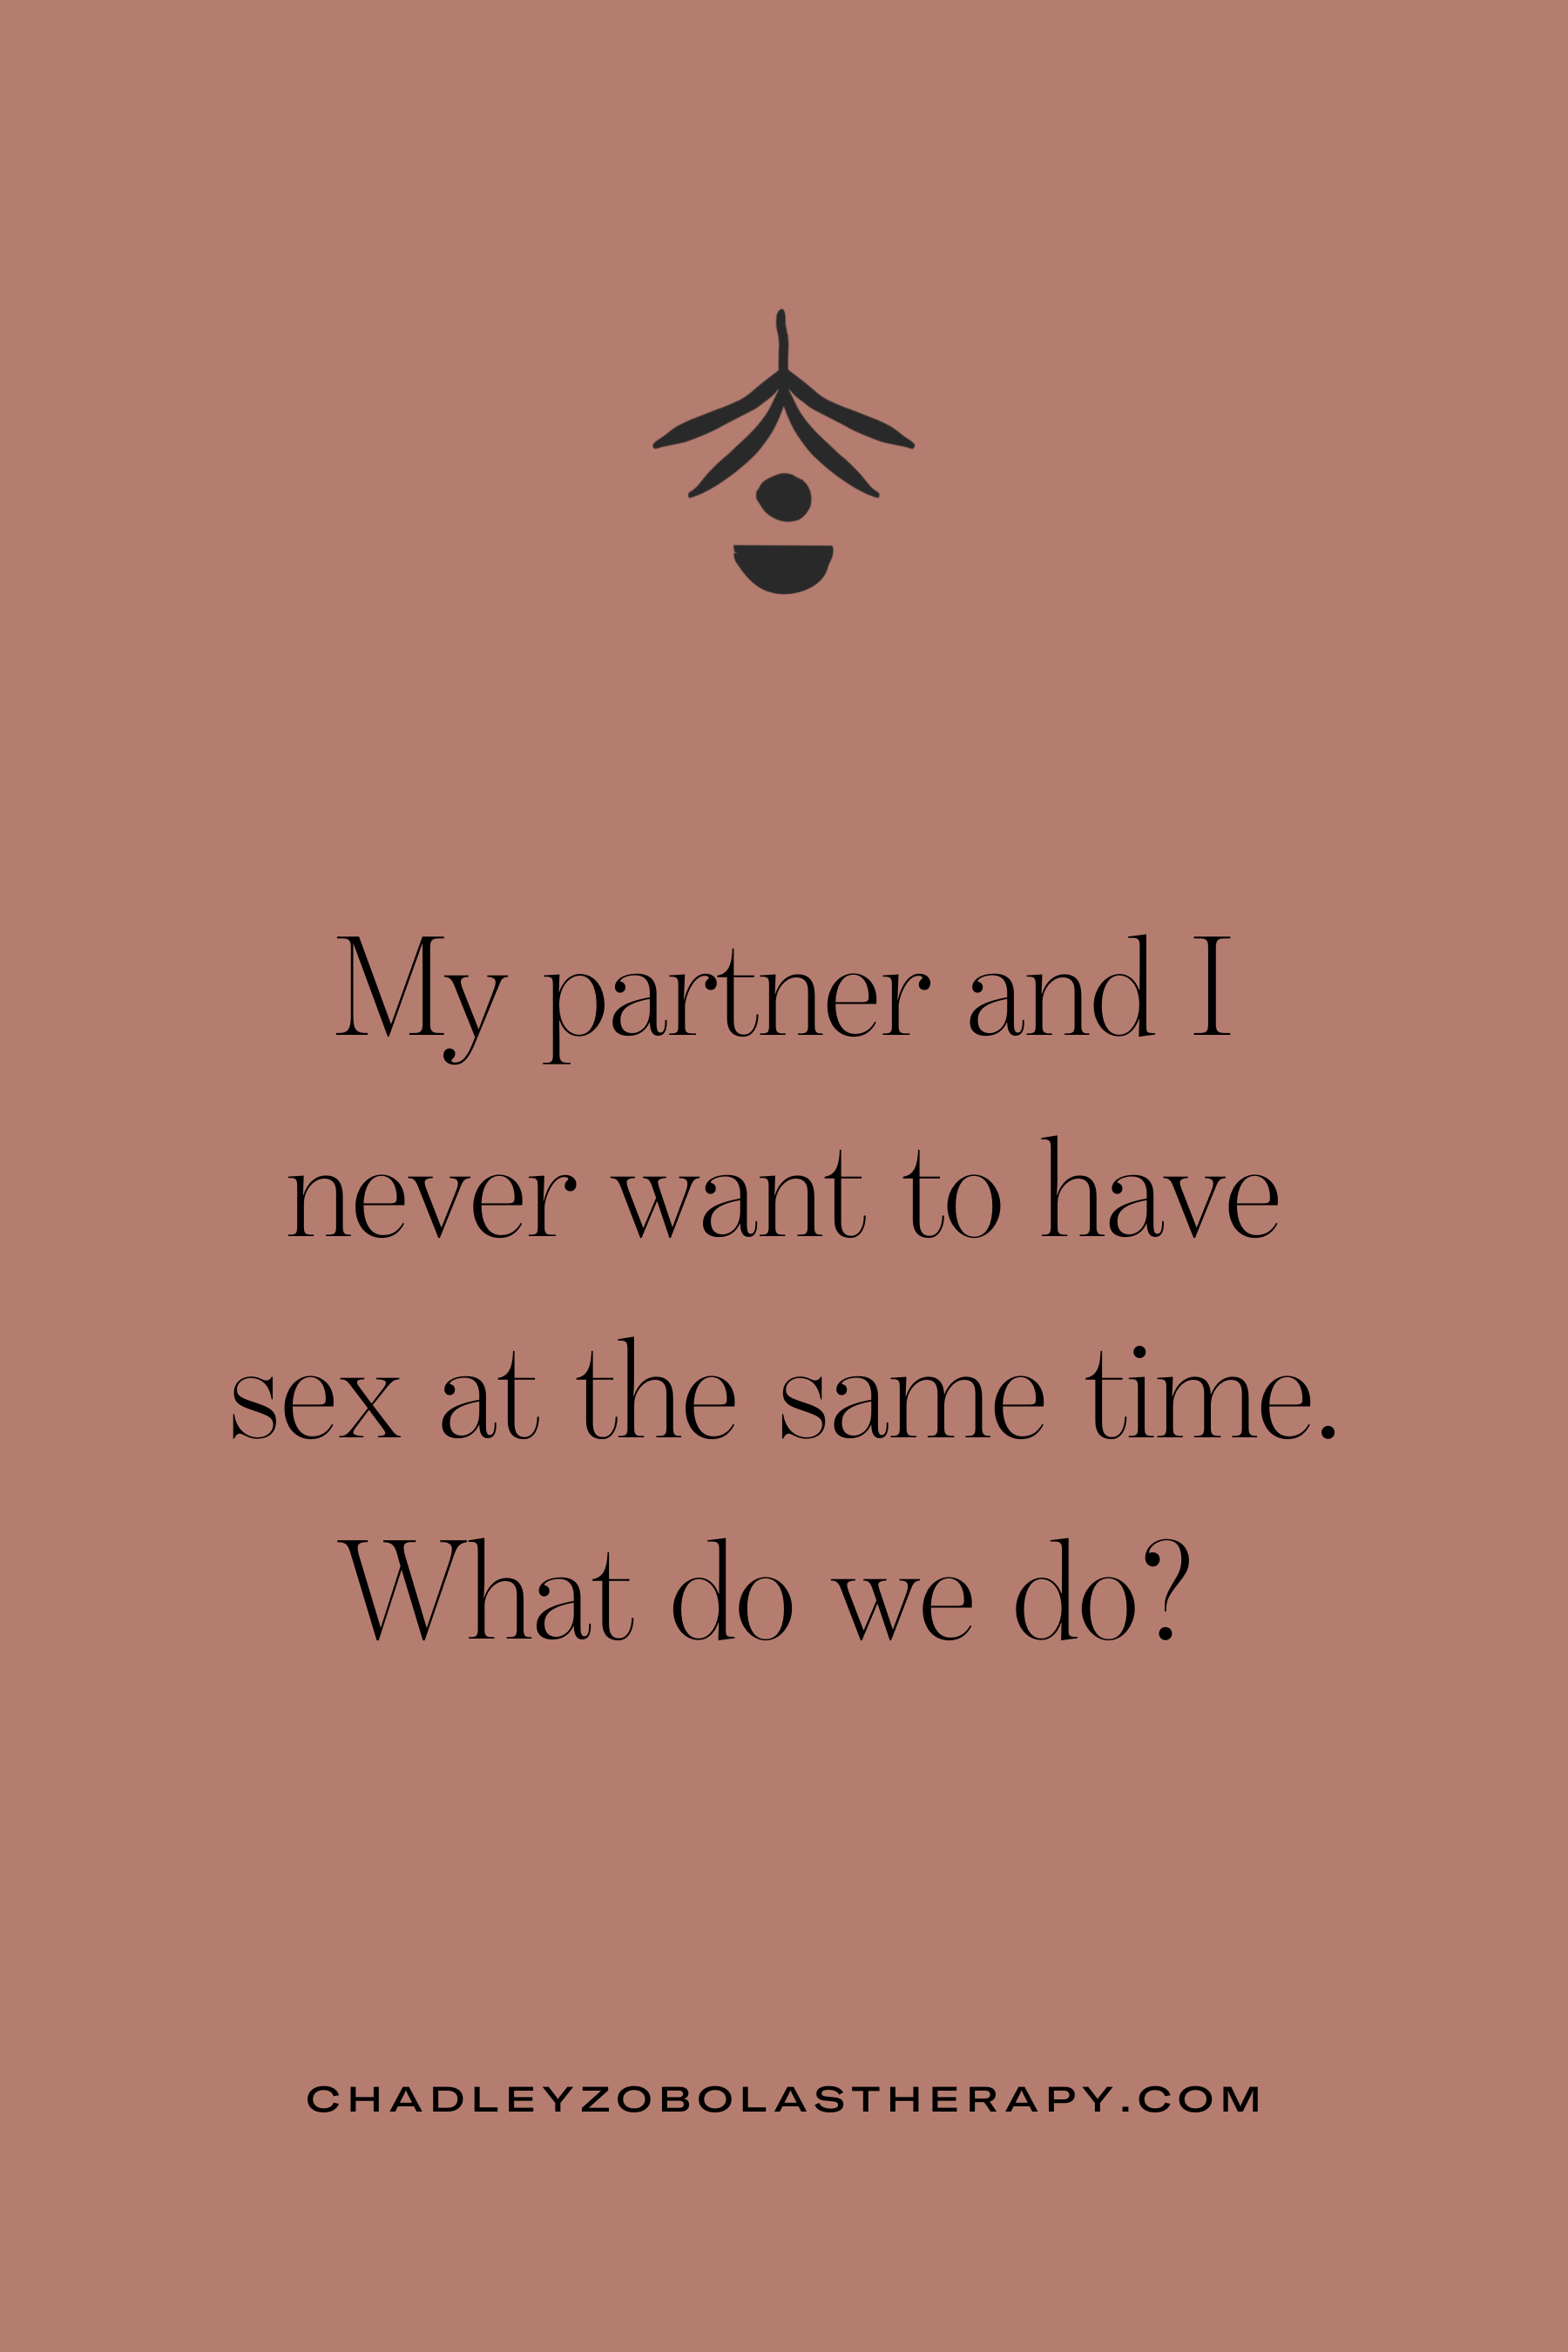 My partner and I never want to have sex at the same time image